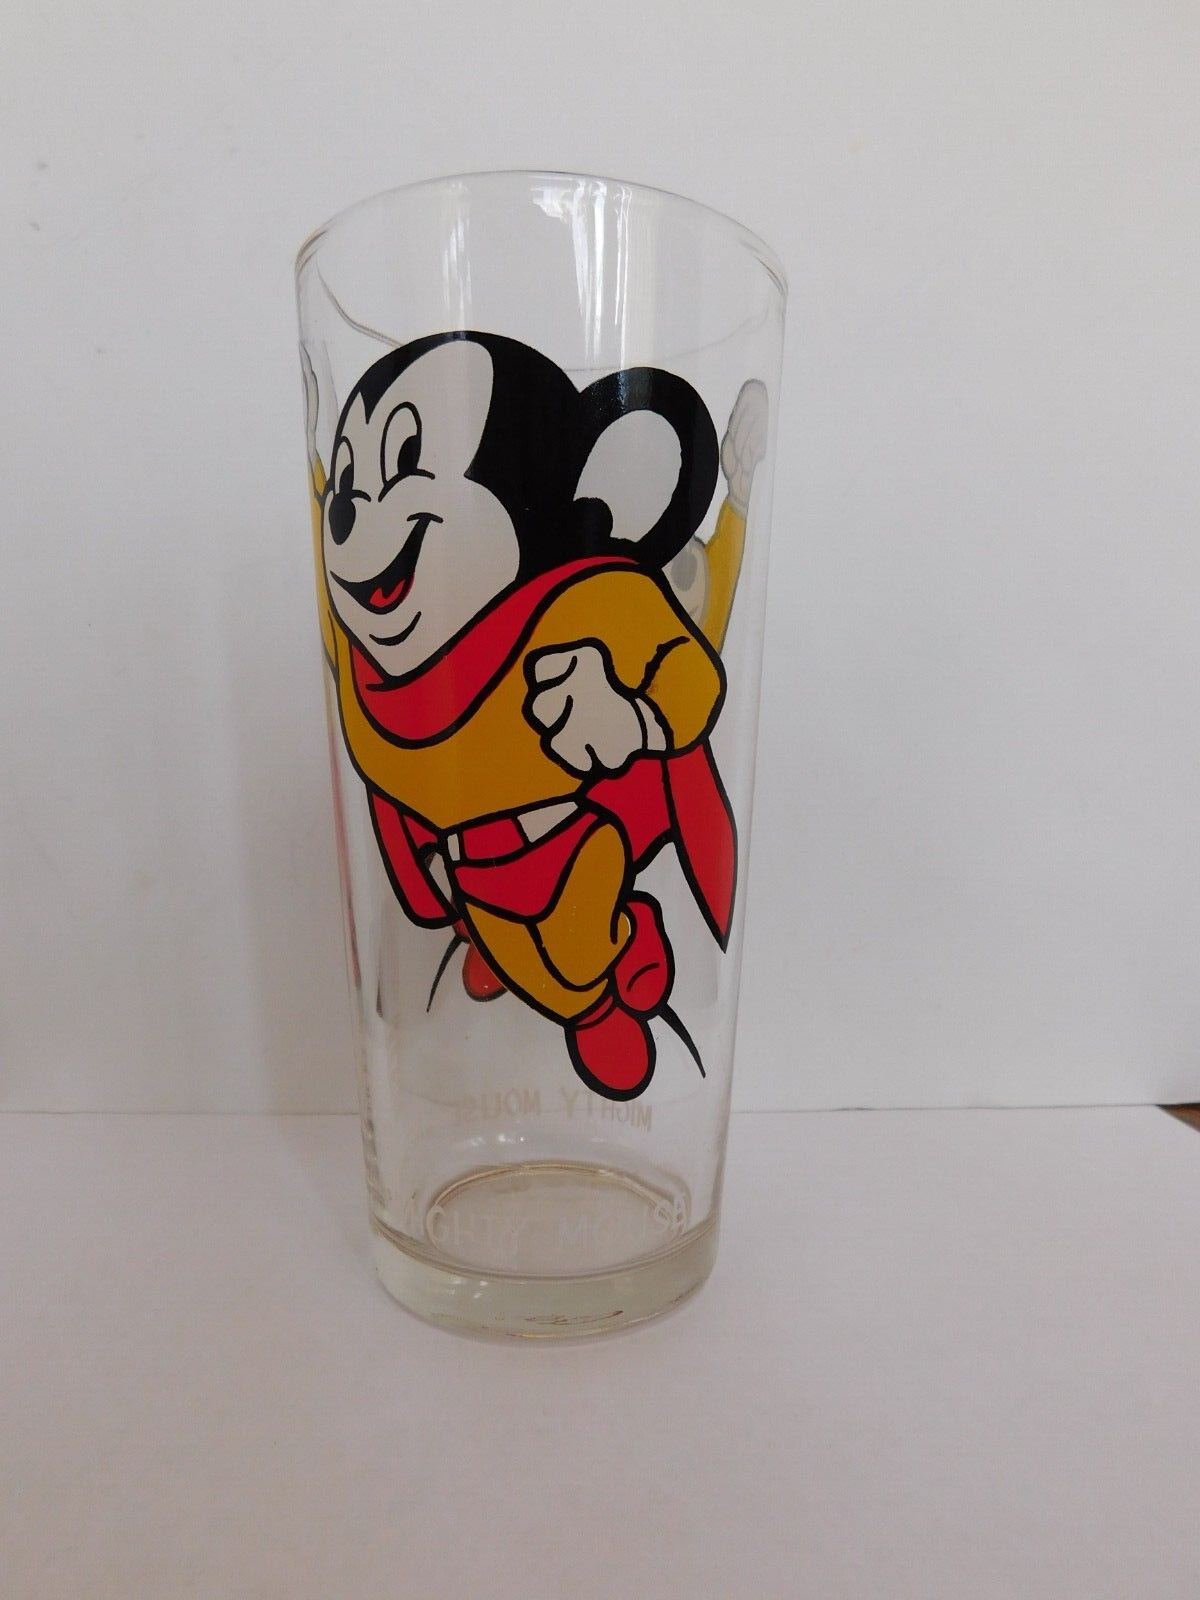 Vintage 1977 Mighty Mouse Pepsi Glass Terrytoons RARE